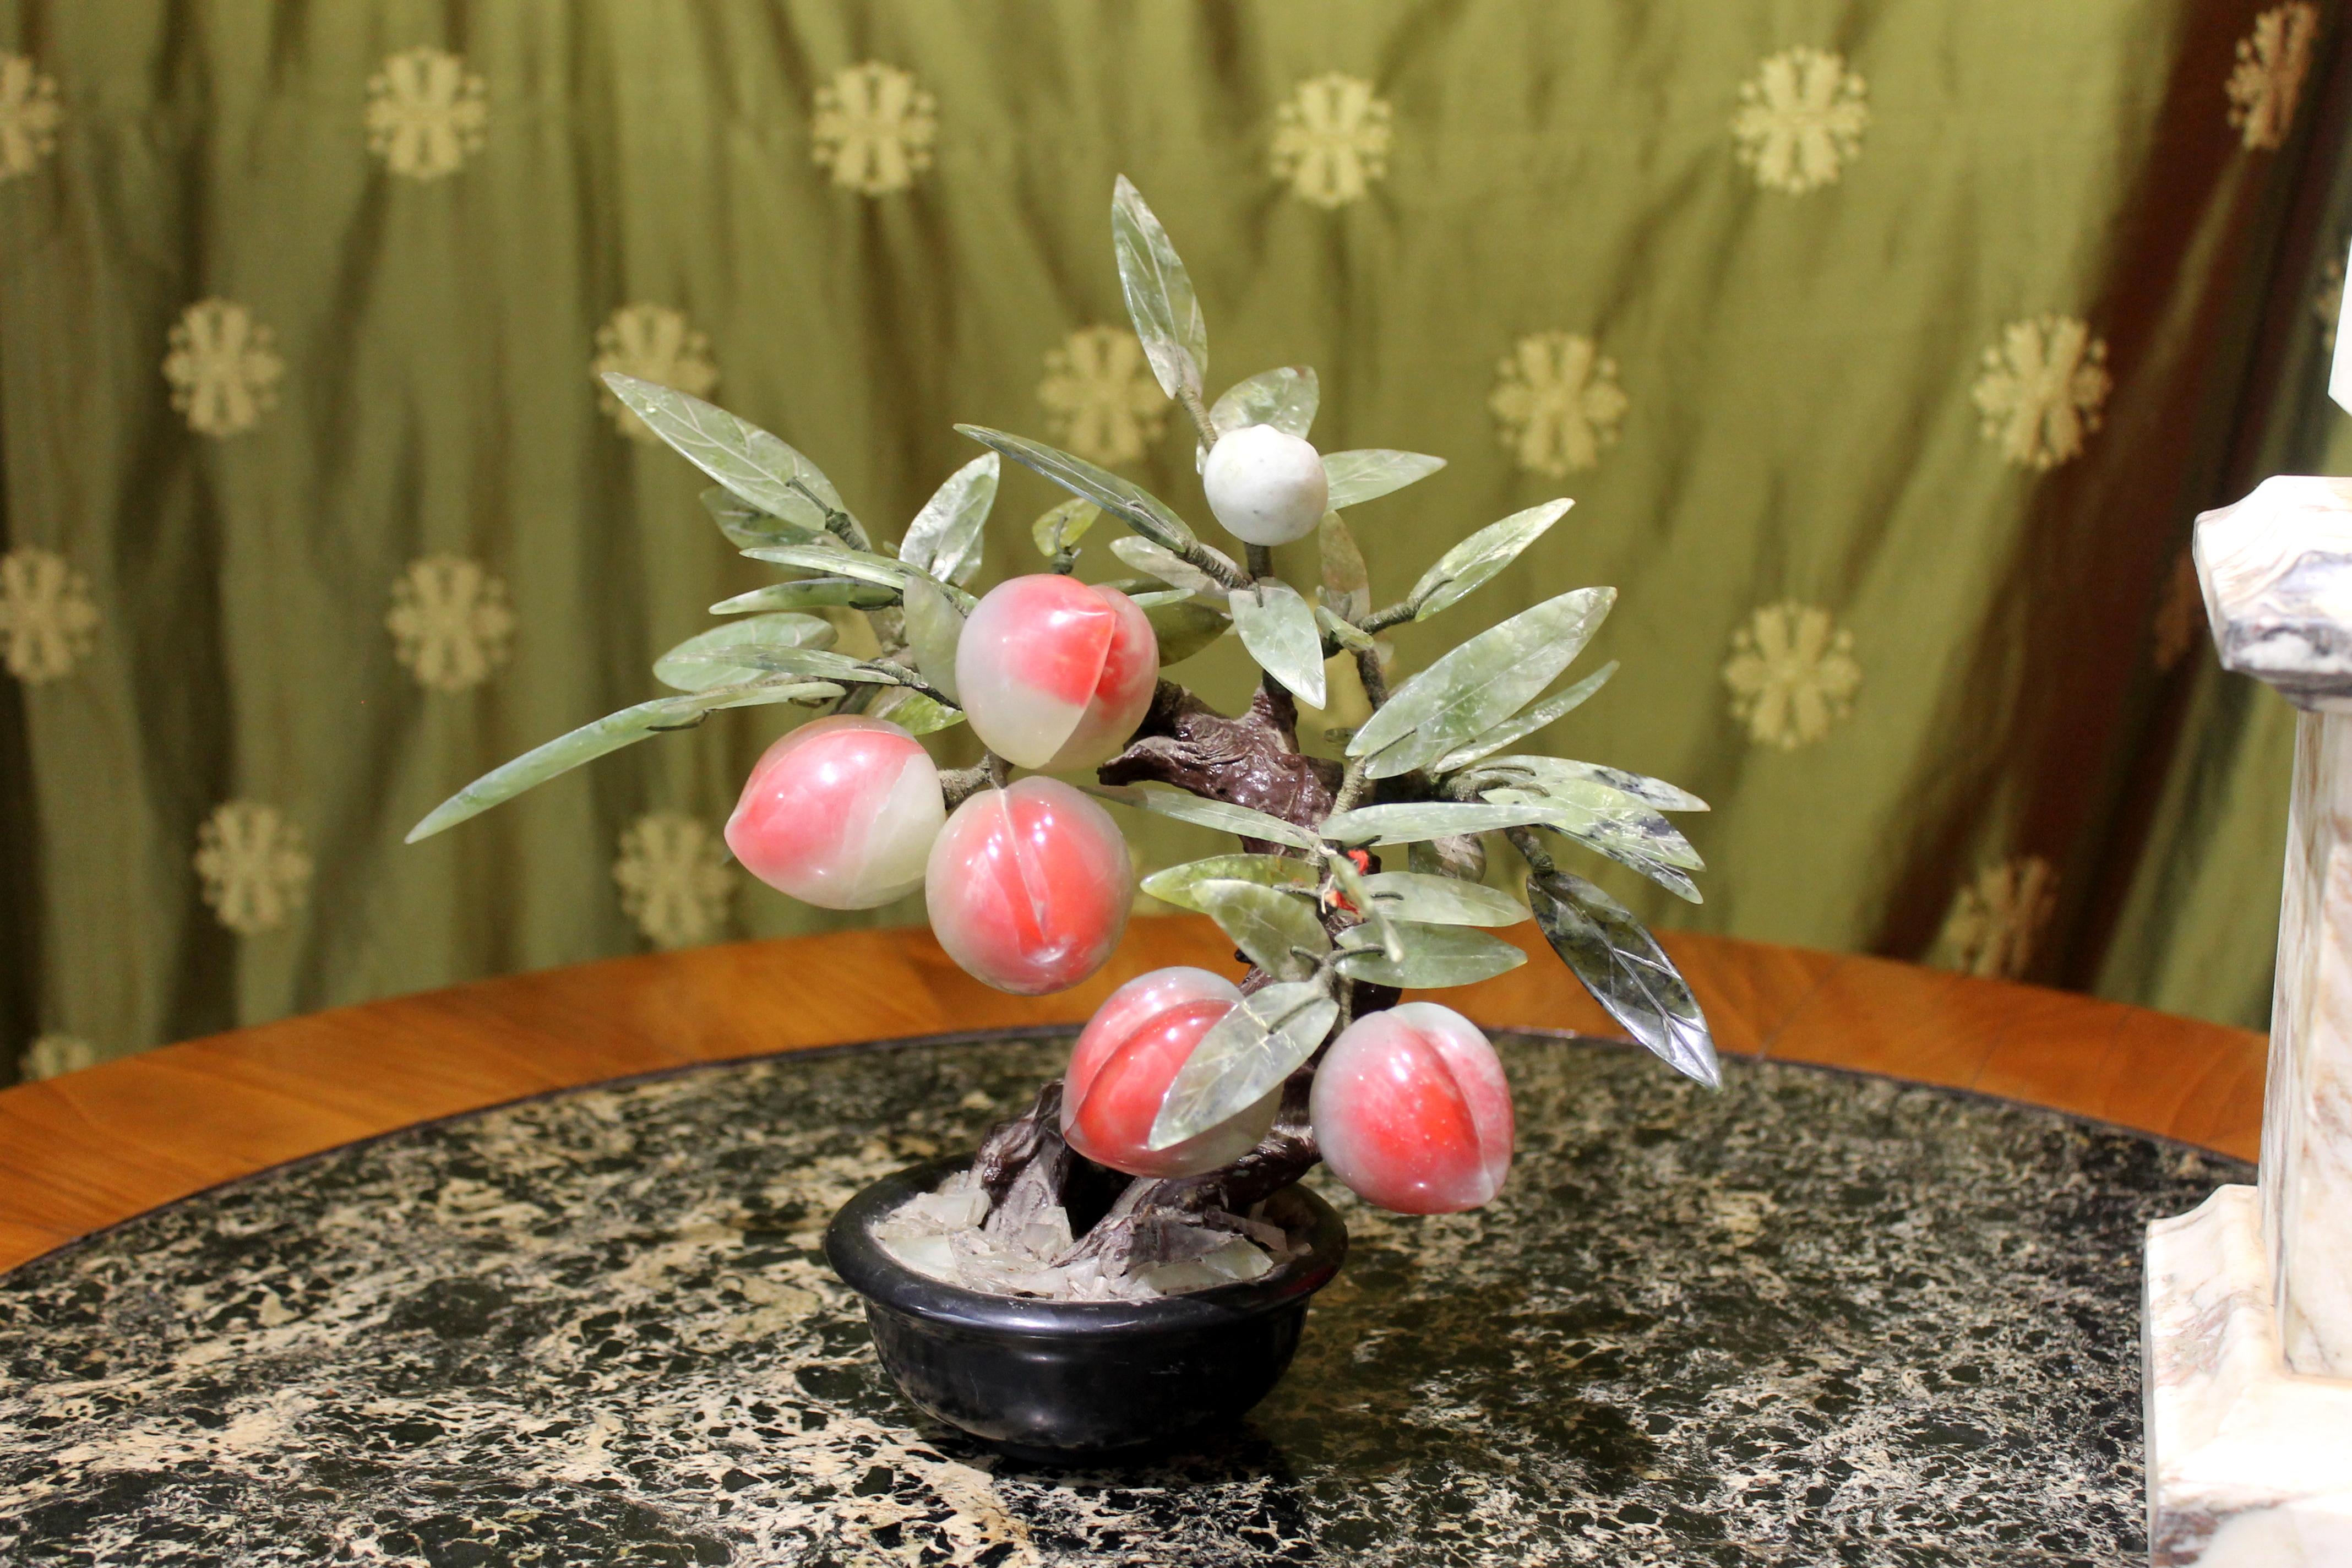 This lovely 1940s circa Chinese bonsai jade and hard stones nectarine peach tree features red and rose ripening fruit and a dense foliage with different shades of green. The branches are neatly covered in green silk threads, coming out from the